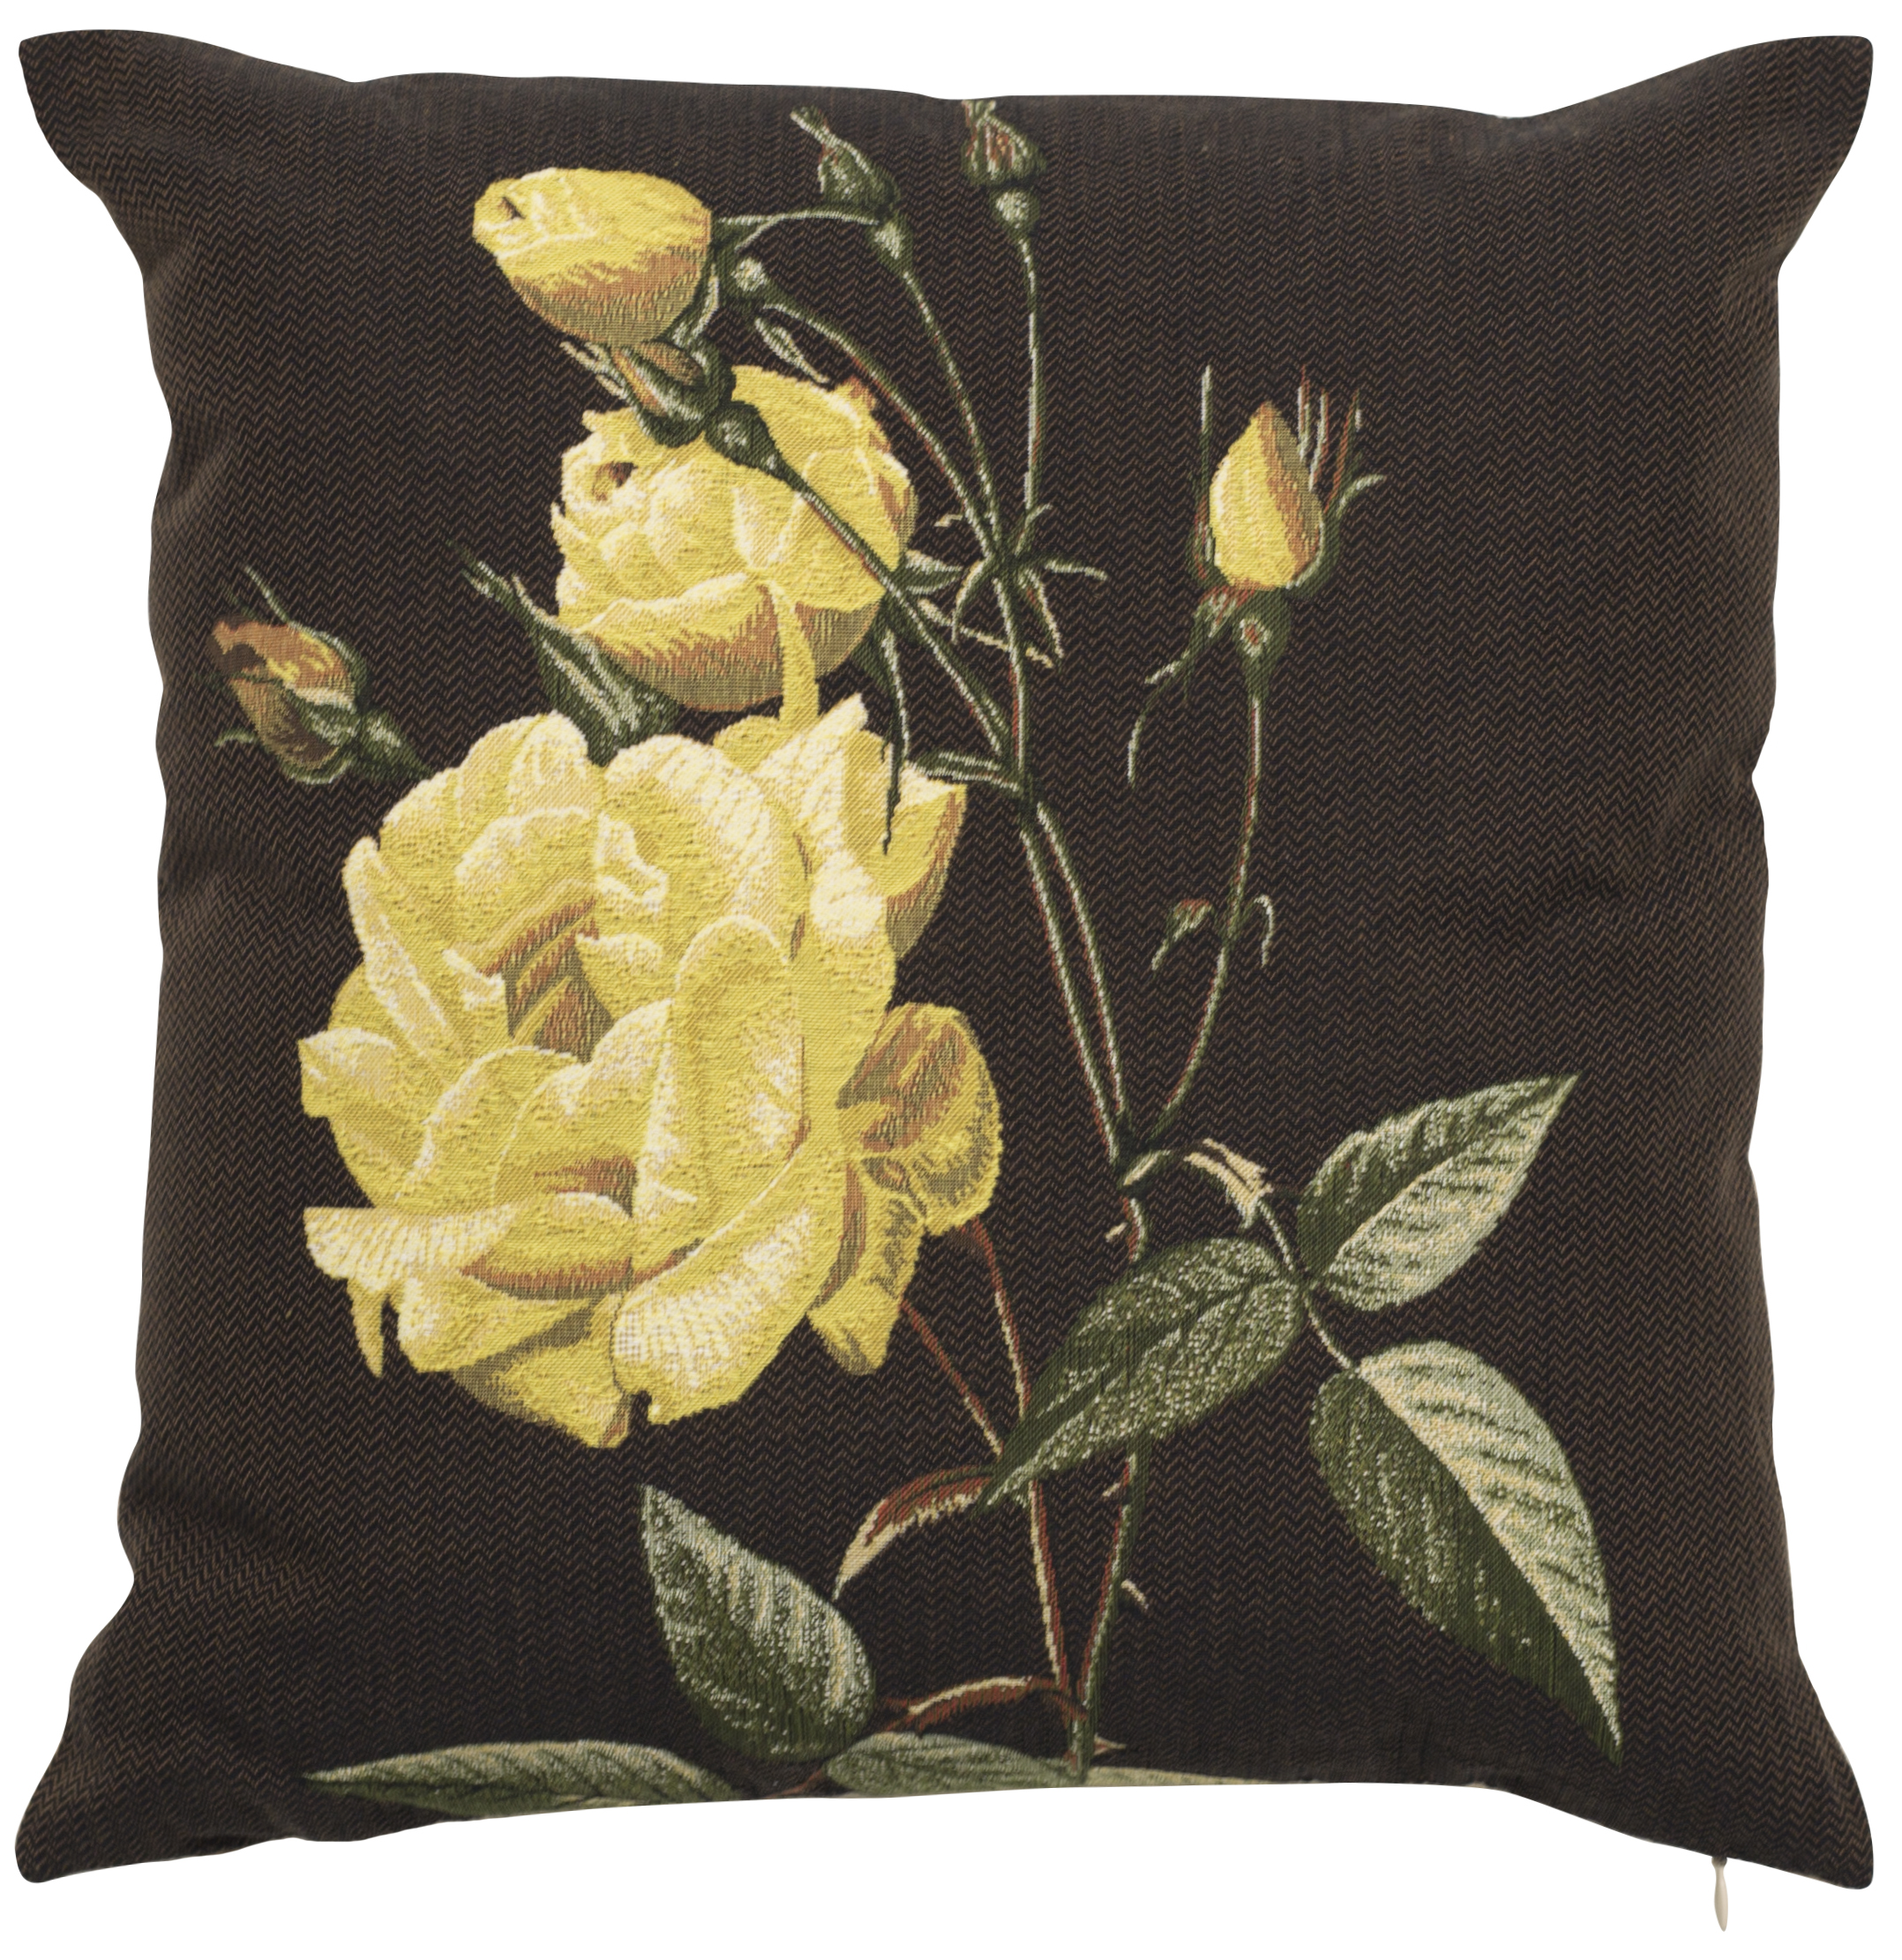 Pillow - Jane - Yellow in Brown Background